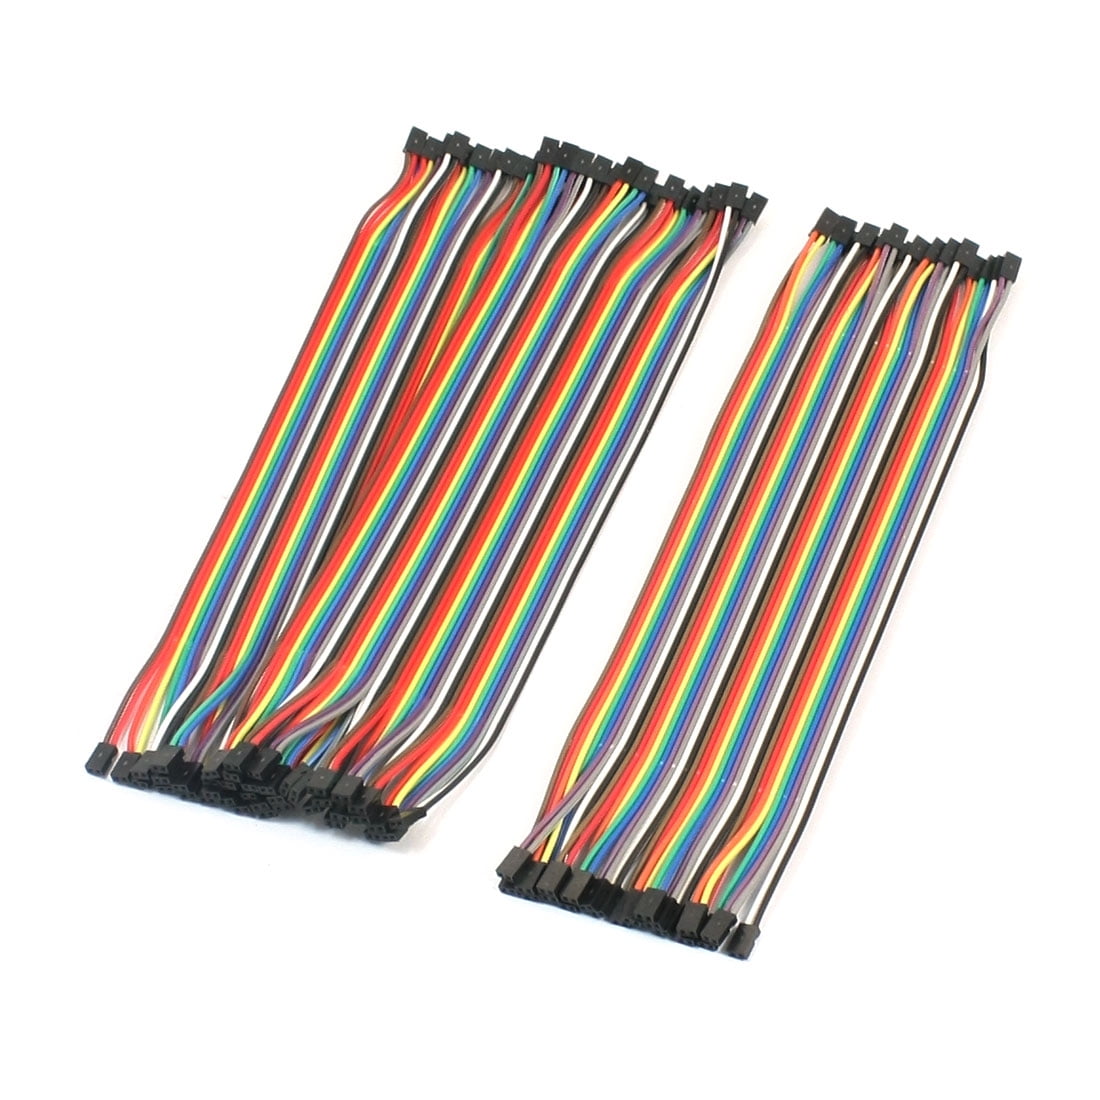 40pcs 50-100cm Dupont Jumper Cable Wire Female-Female Pin Connector 2.54mm pcb 